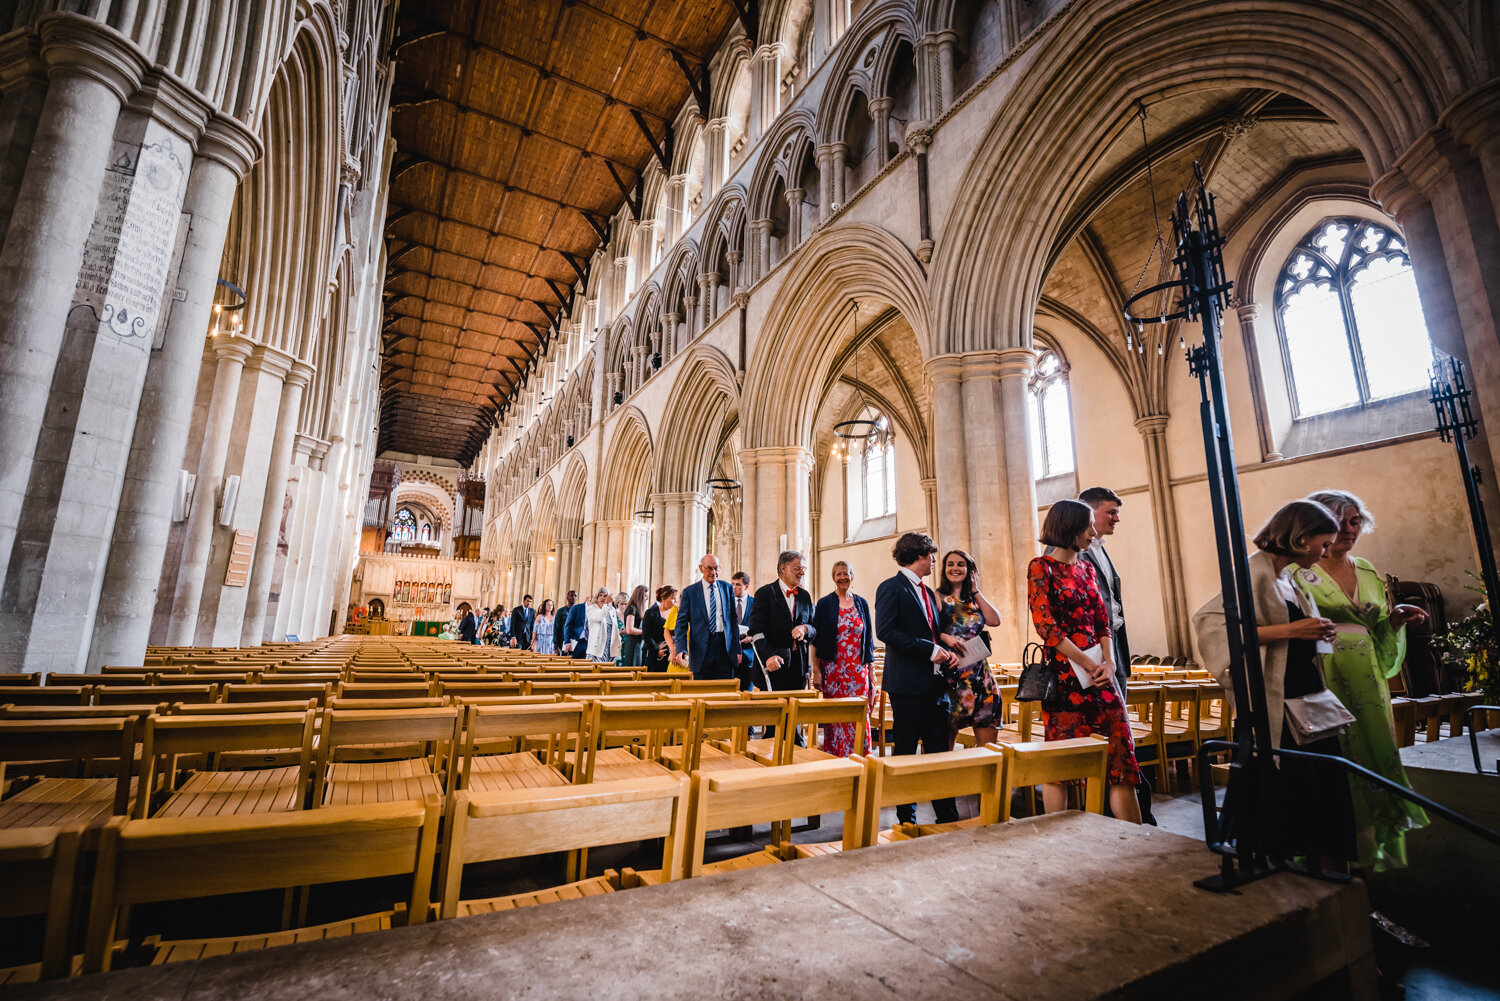 st-albans-cathedral-abbey-wedding-photos-pike-photography-246.jpg